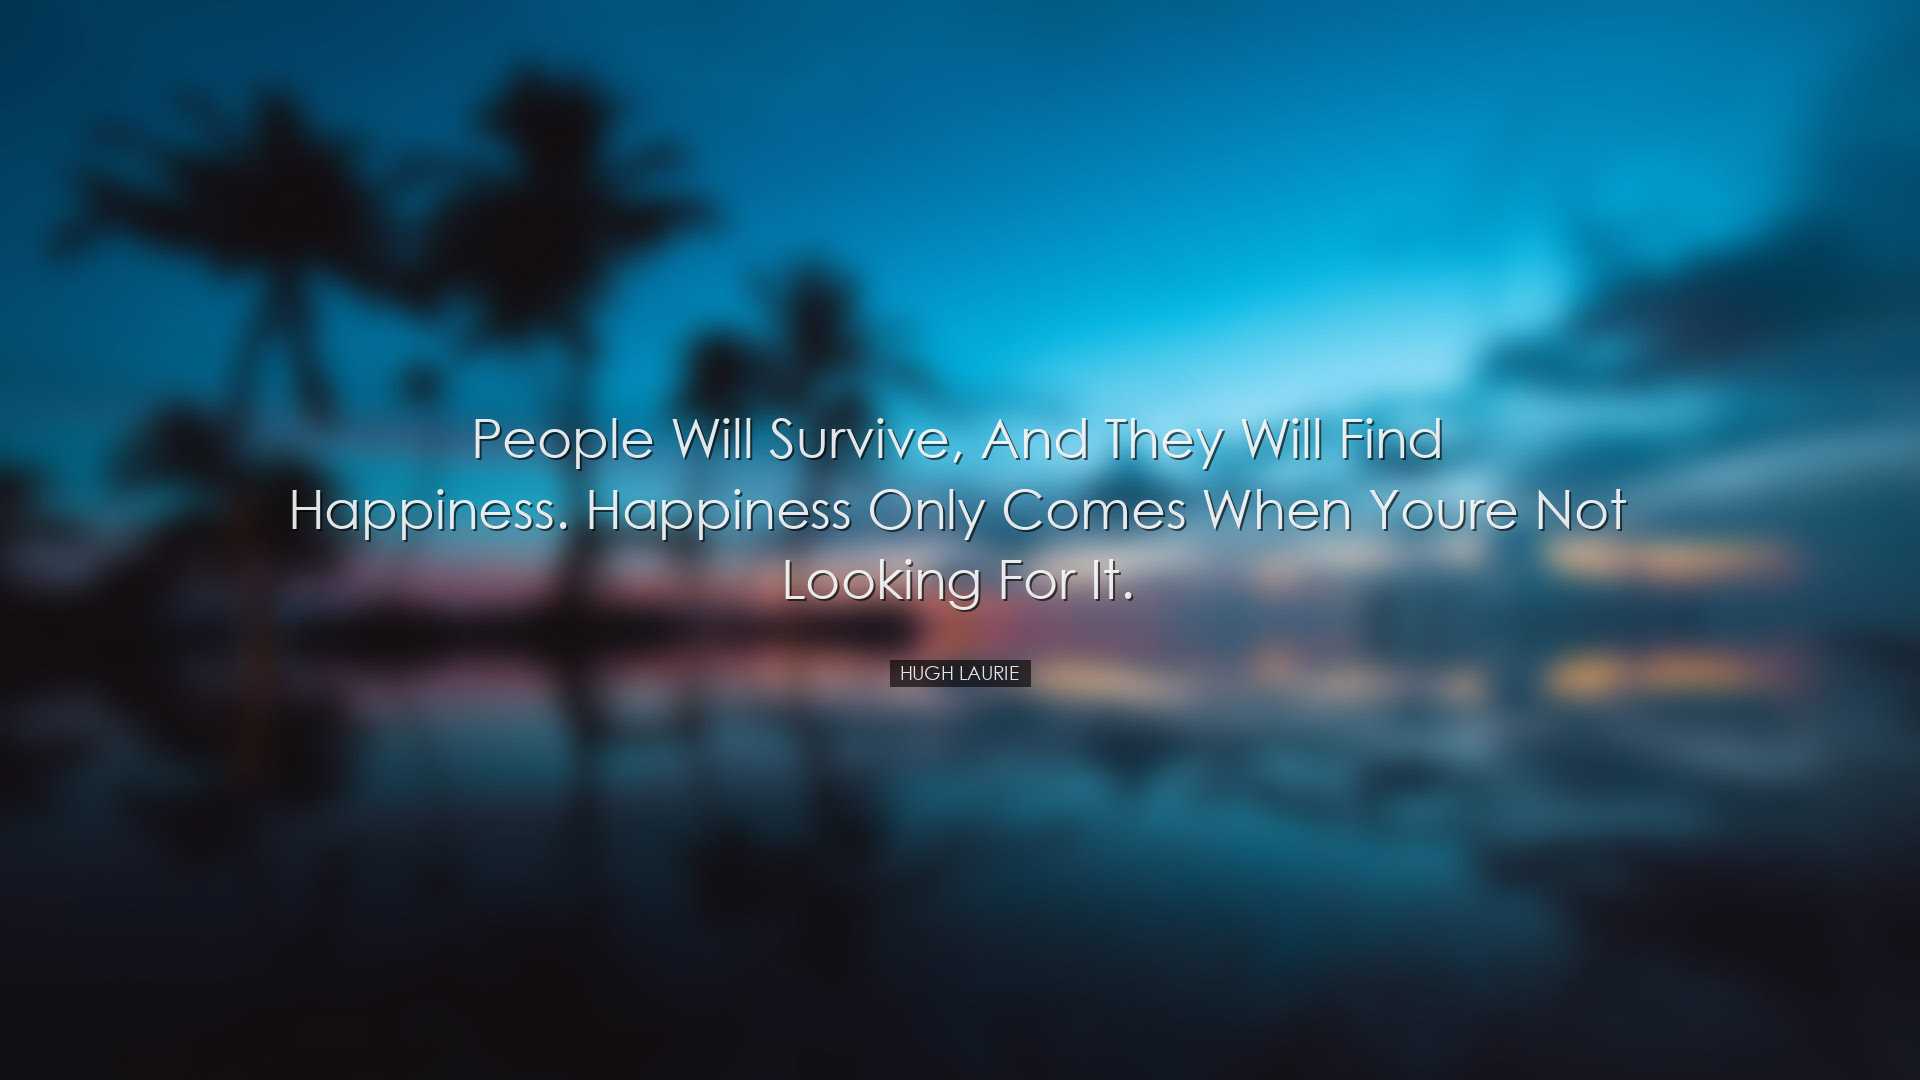 People will survive, and they will find happiness. Happiness only